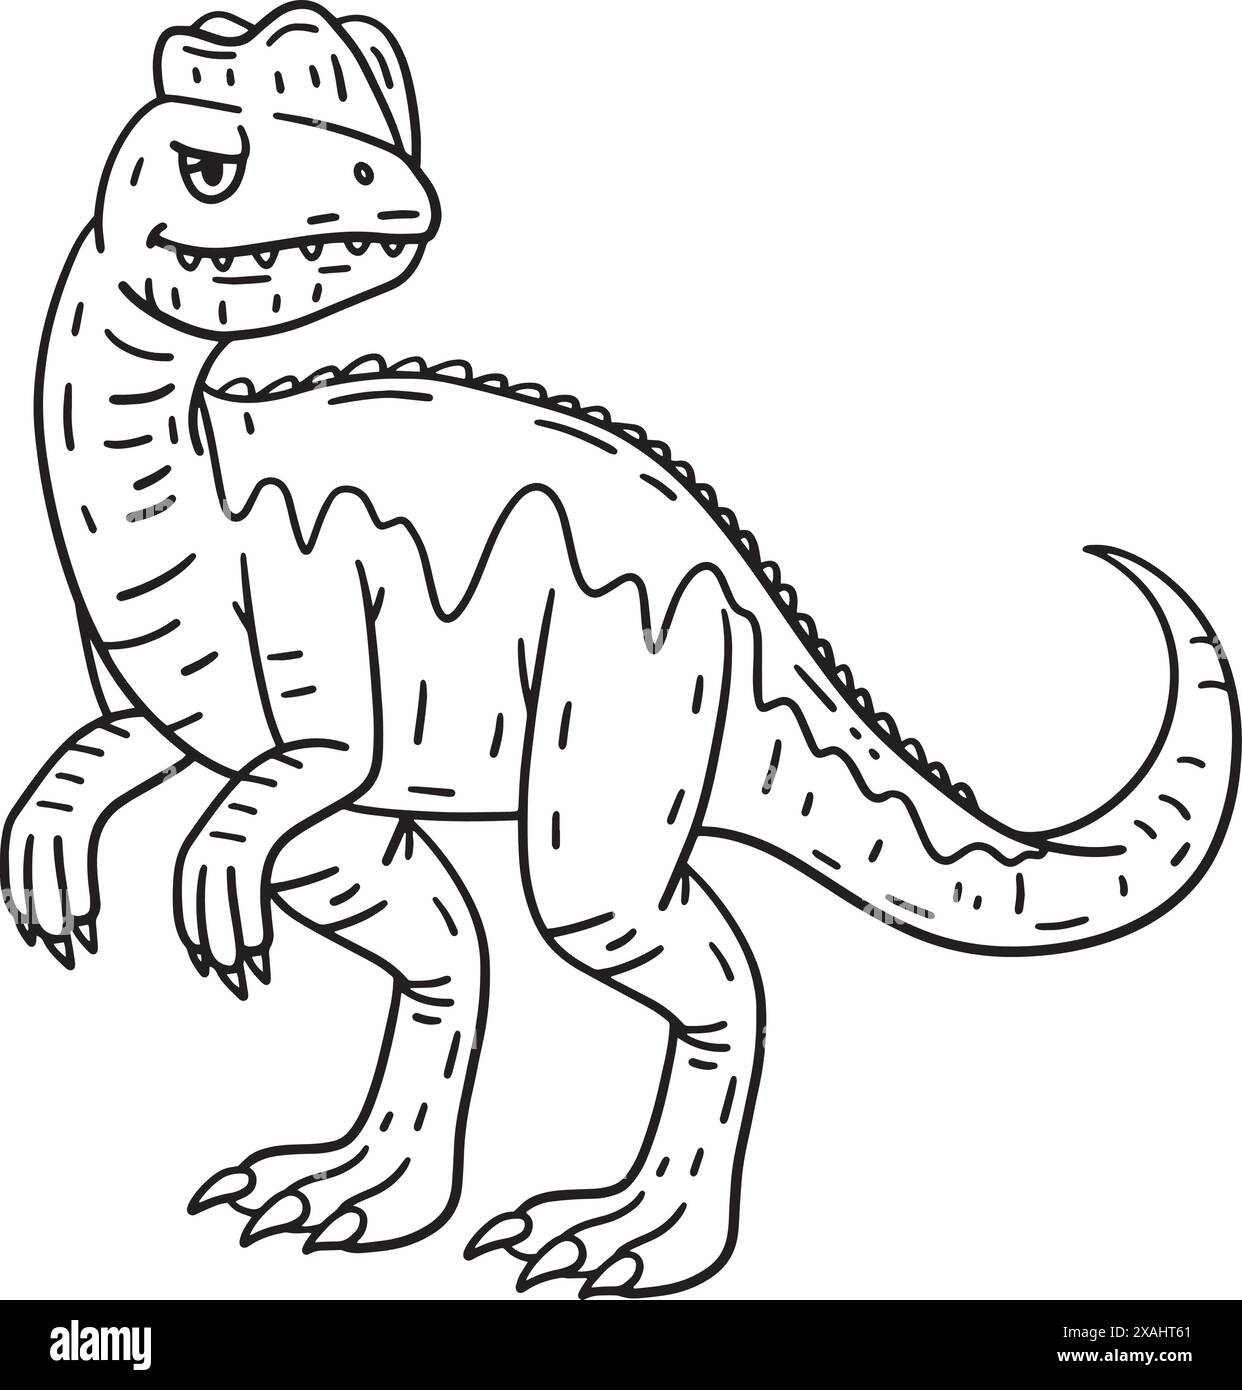 Dilophosaurus Dinosaur Isolated Coloring Page  Stock Vector